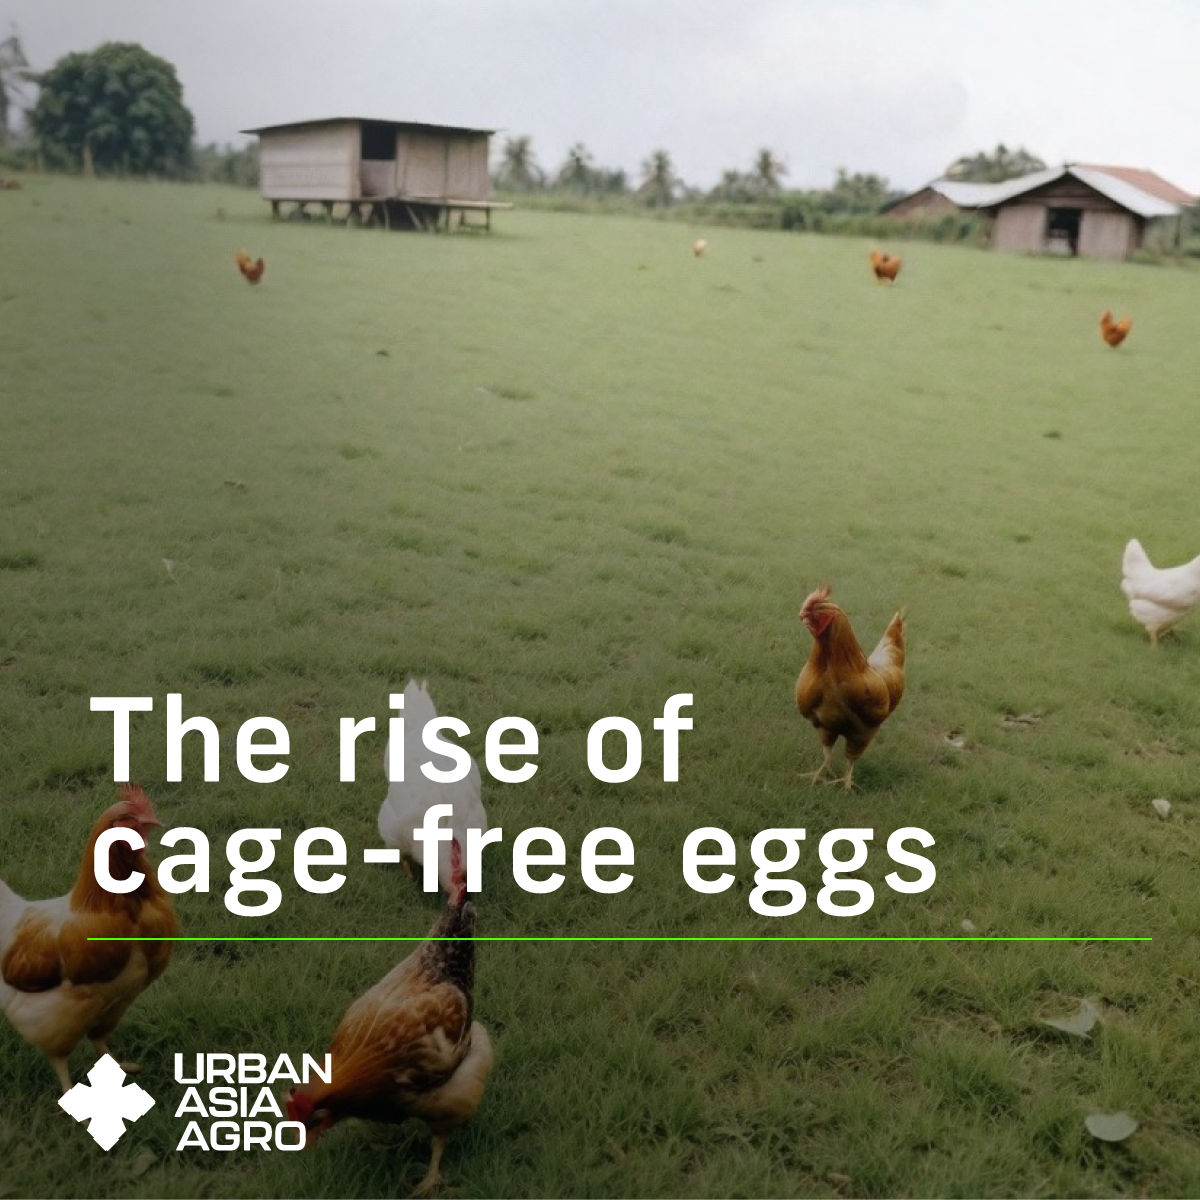 The rise of the cage-free egg production